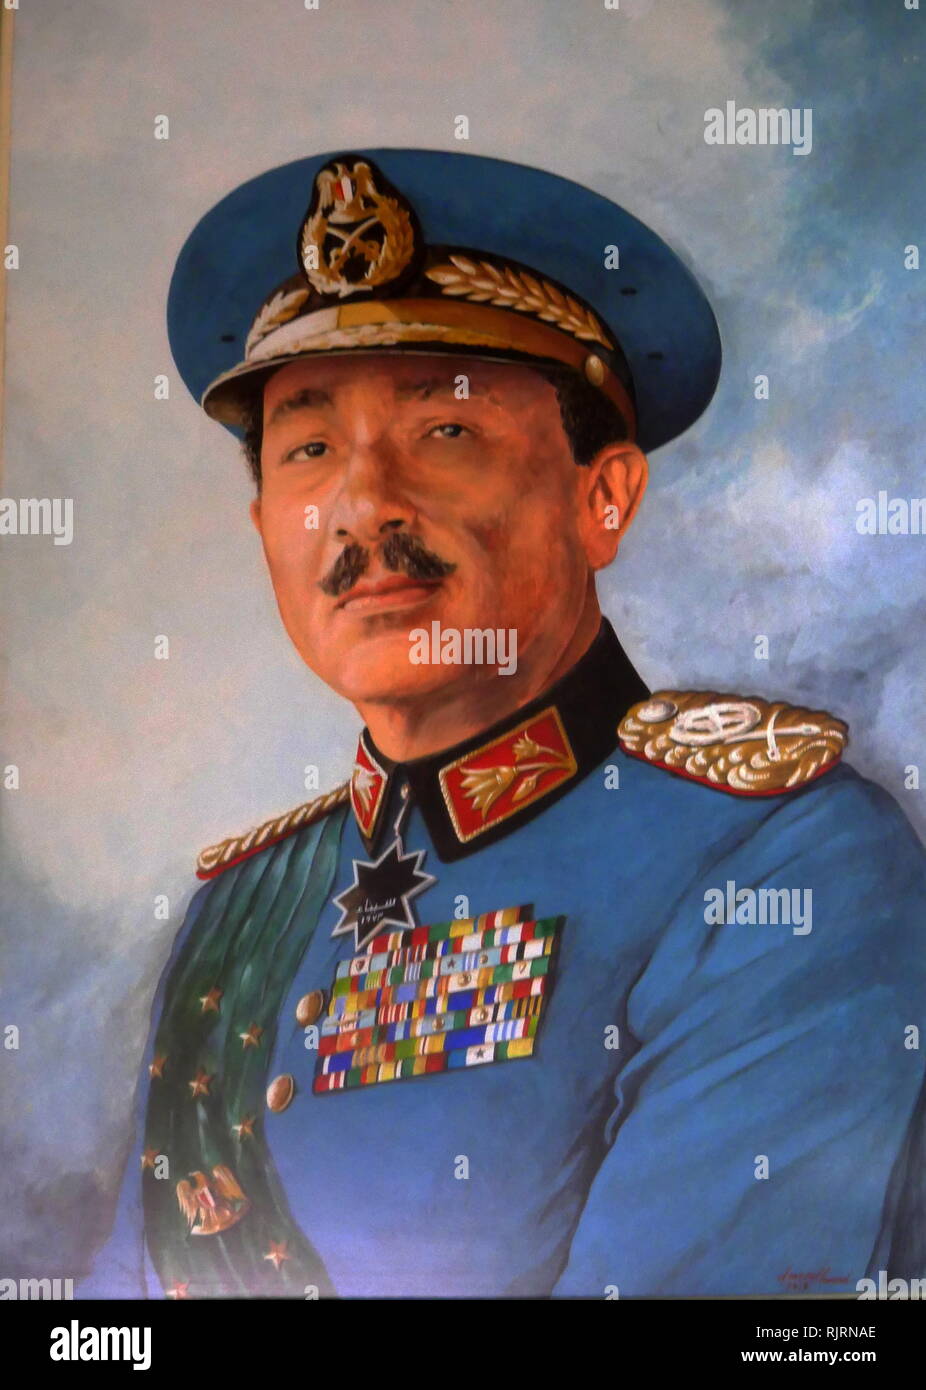 Muhammad Anwar el-Sadat (1918 - 1981), President of Egypt, serving from 15 October 1970 until his assassination by fundamentalist army officers on 6 October 1981. Sadat was a senior member of the Free Officers who overthrew King Farouk in the Egyptian Revolution of 1952, and a close confidant of President Gamal Abdel Nasser, under whom he served as Vice President twice and whom he succeeded as President in 1970. Stock Photo